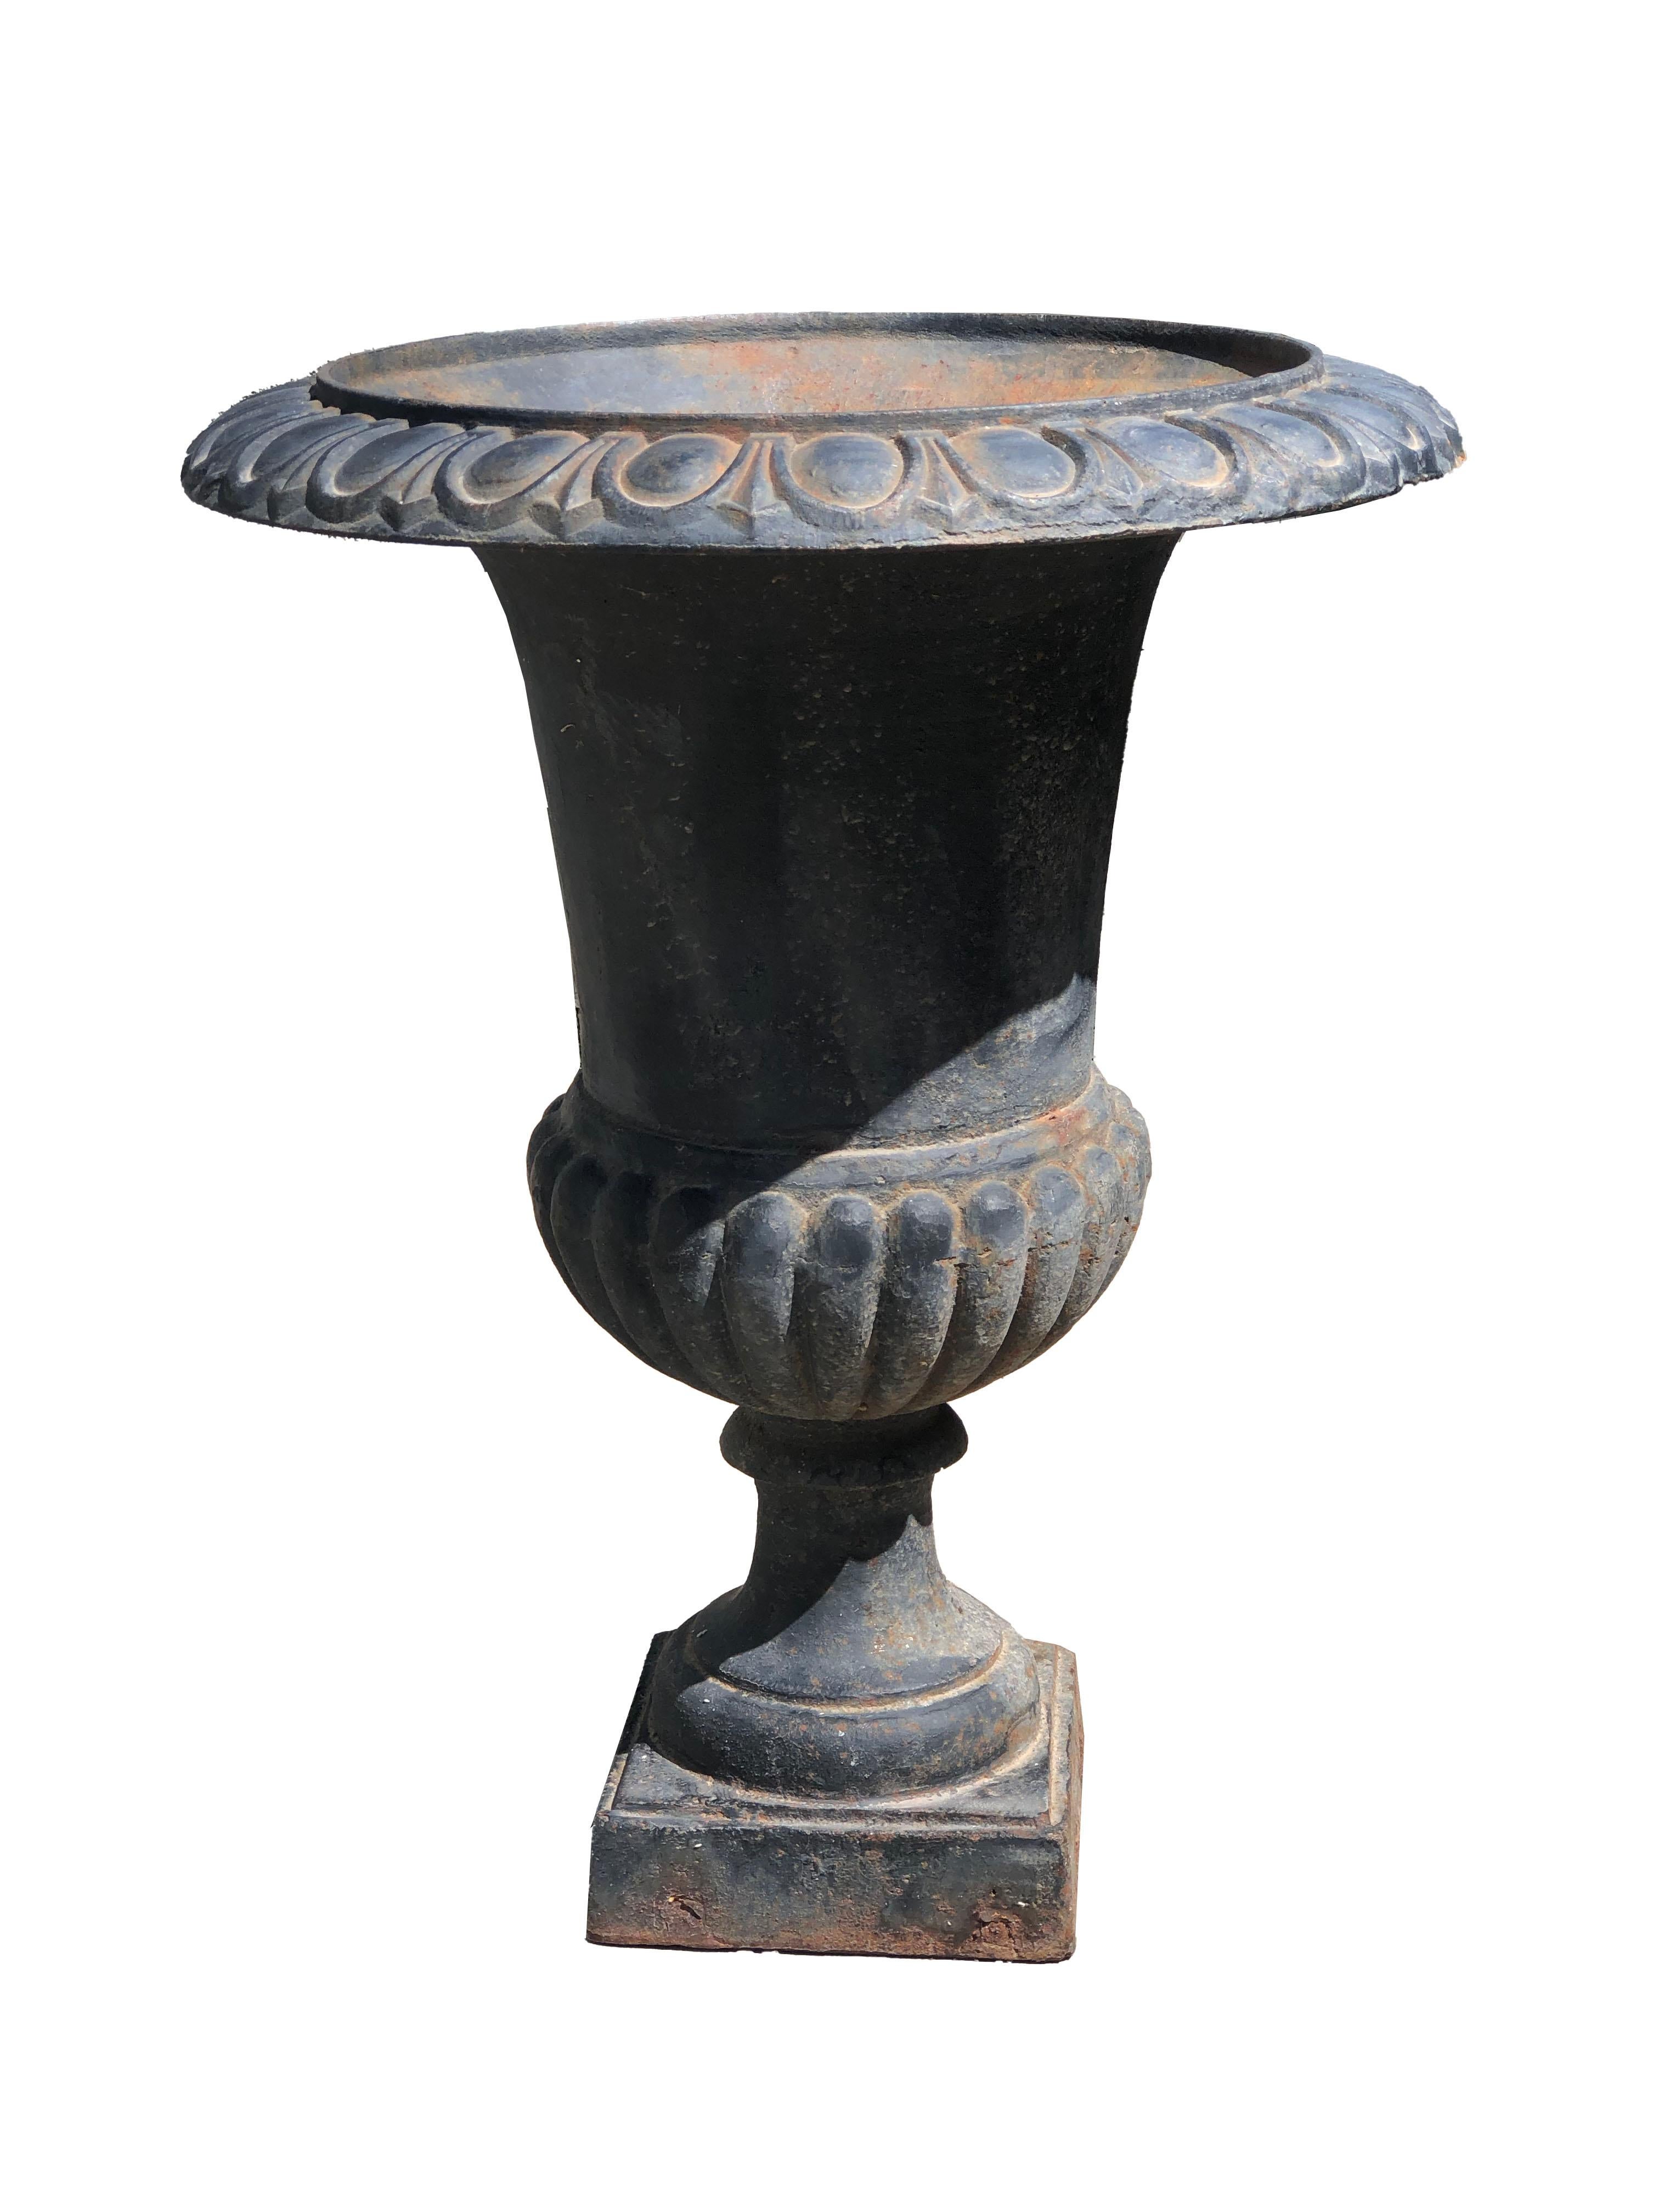 A pair of neoclassical style cast iron planters or jardinieres with black finish.